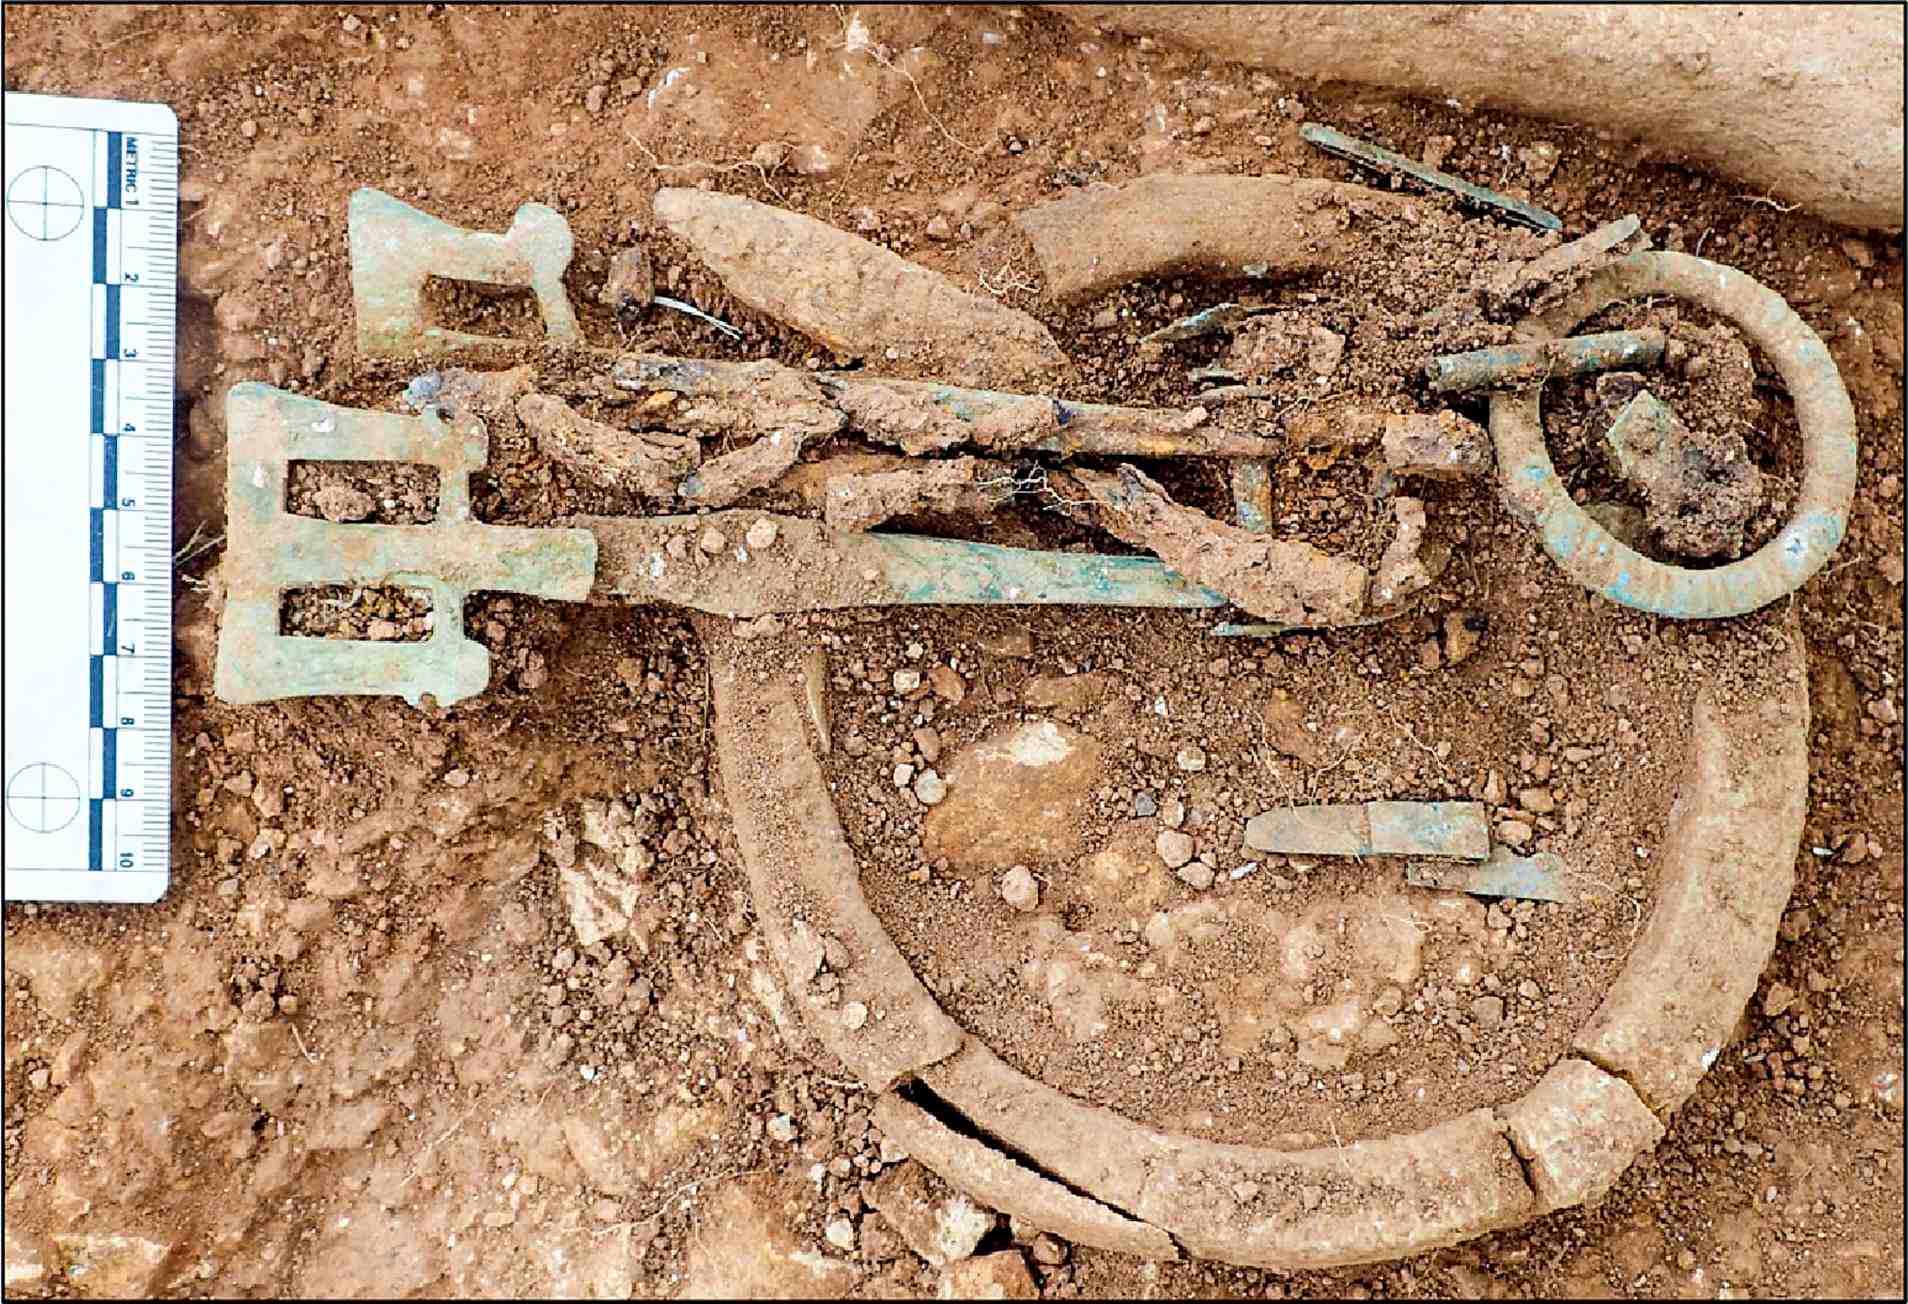 Ivory bag ring and girdle hangers associated with skeleton SK12 at Scremby, Lincolnshire.